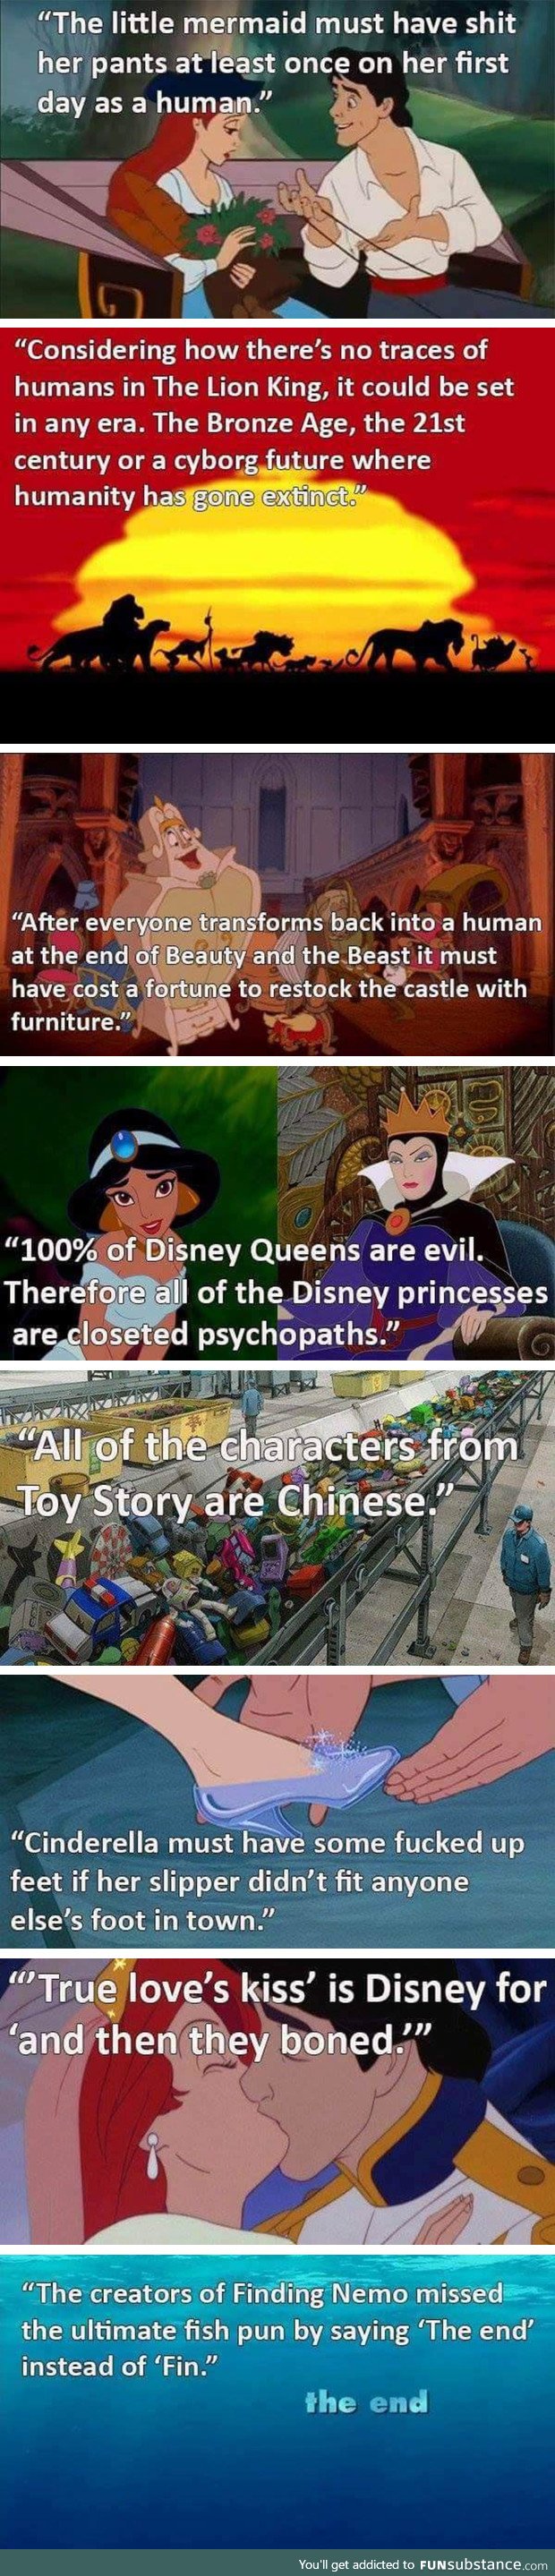 Something to think about: Disney edition